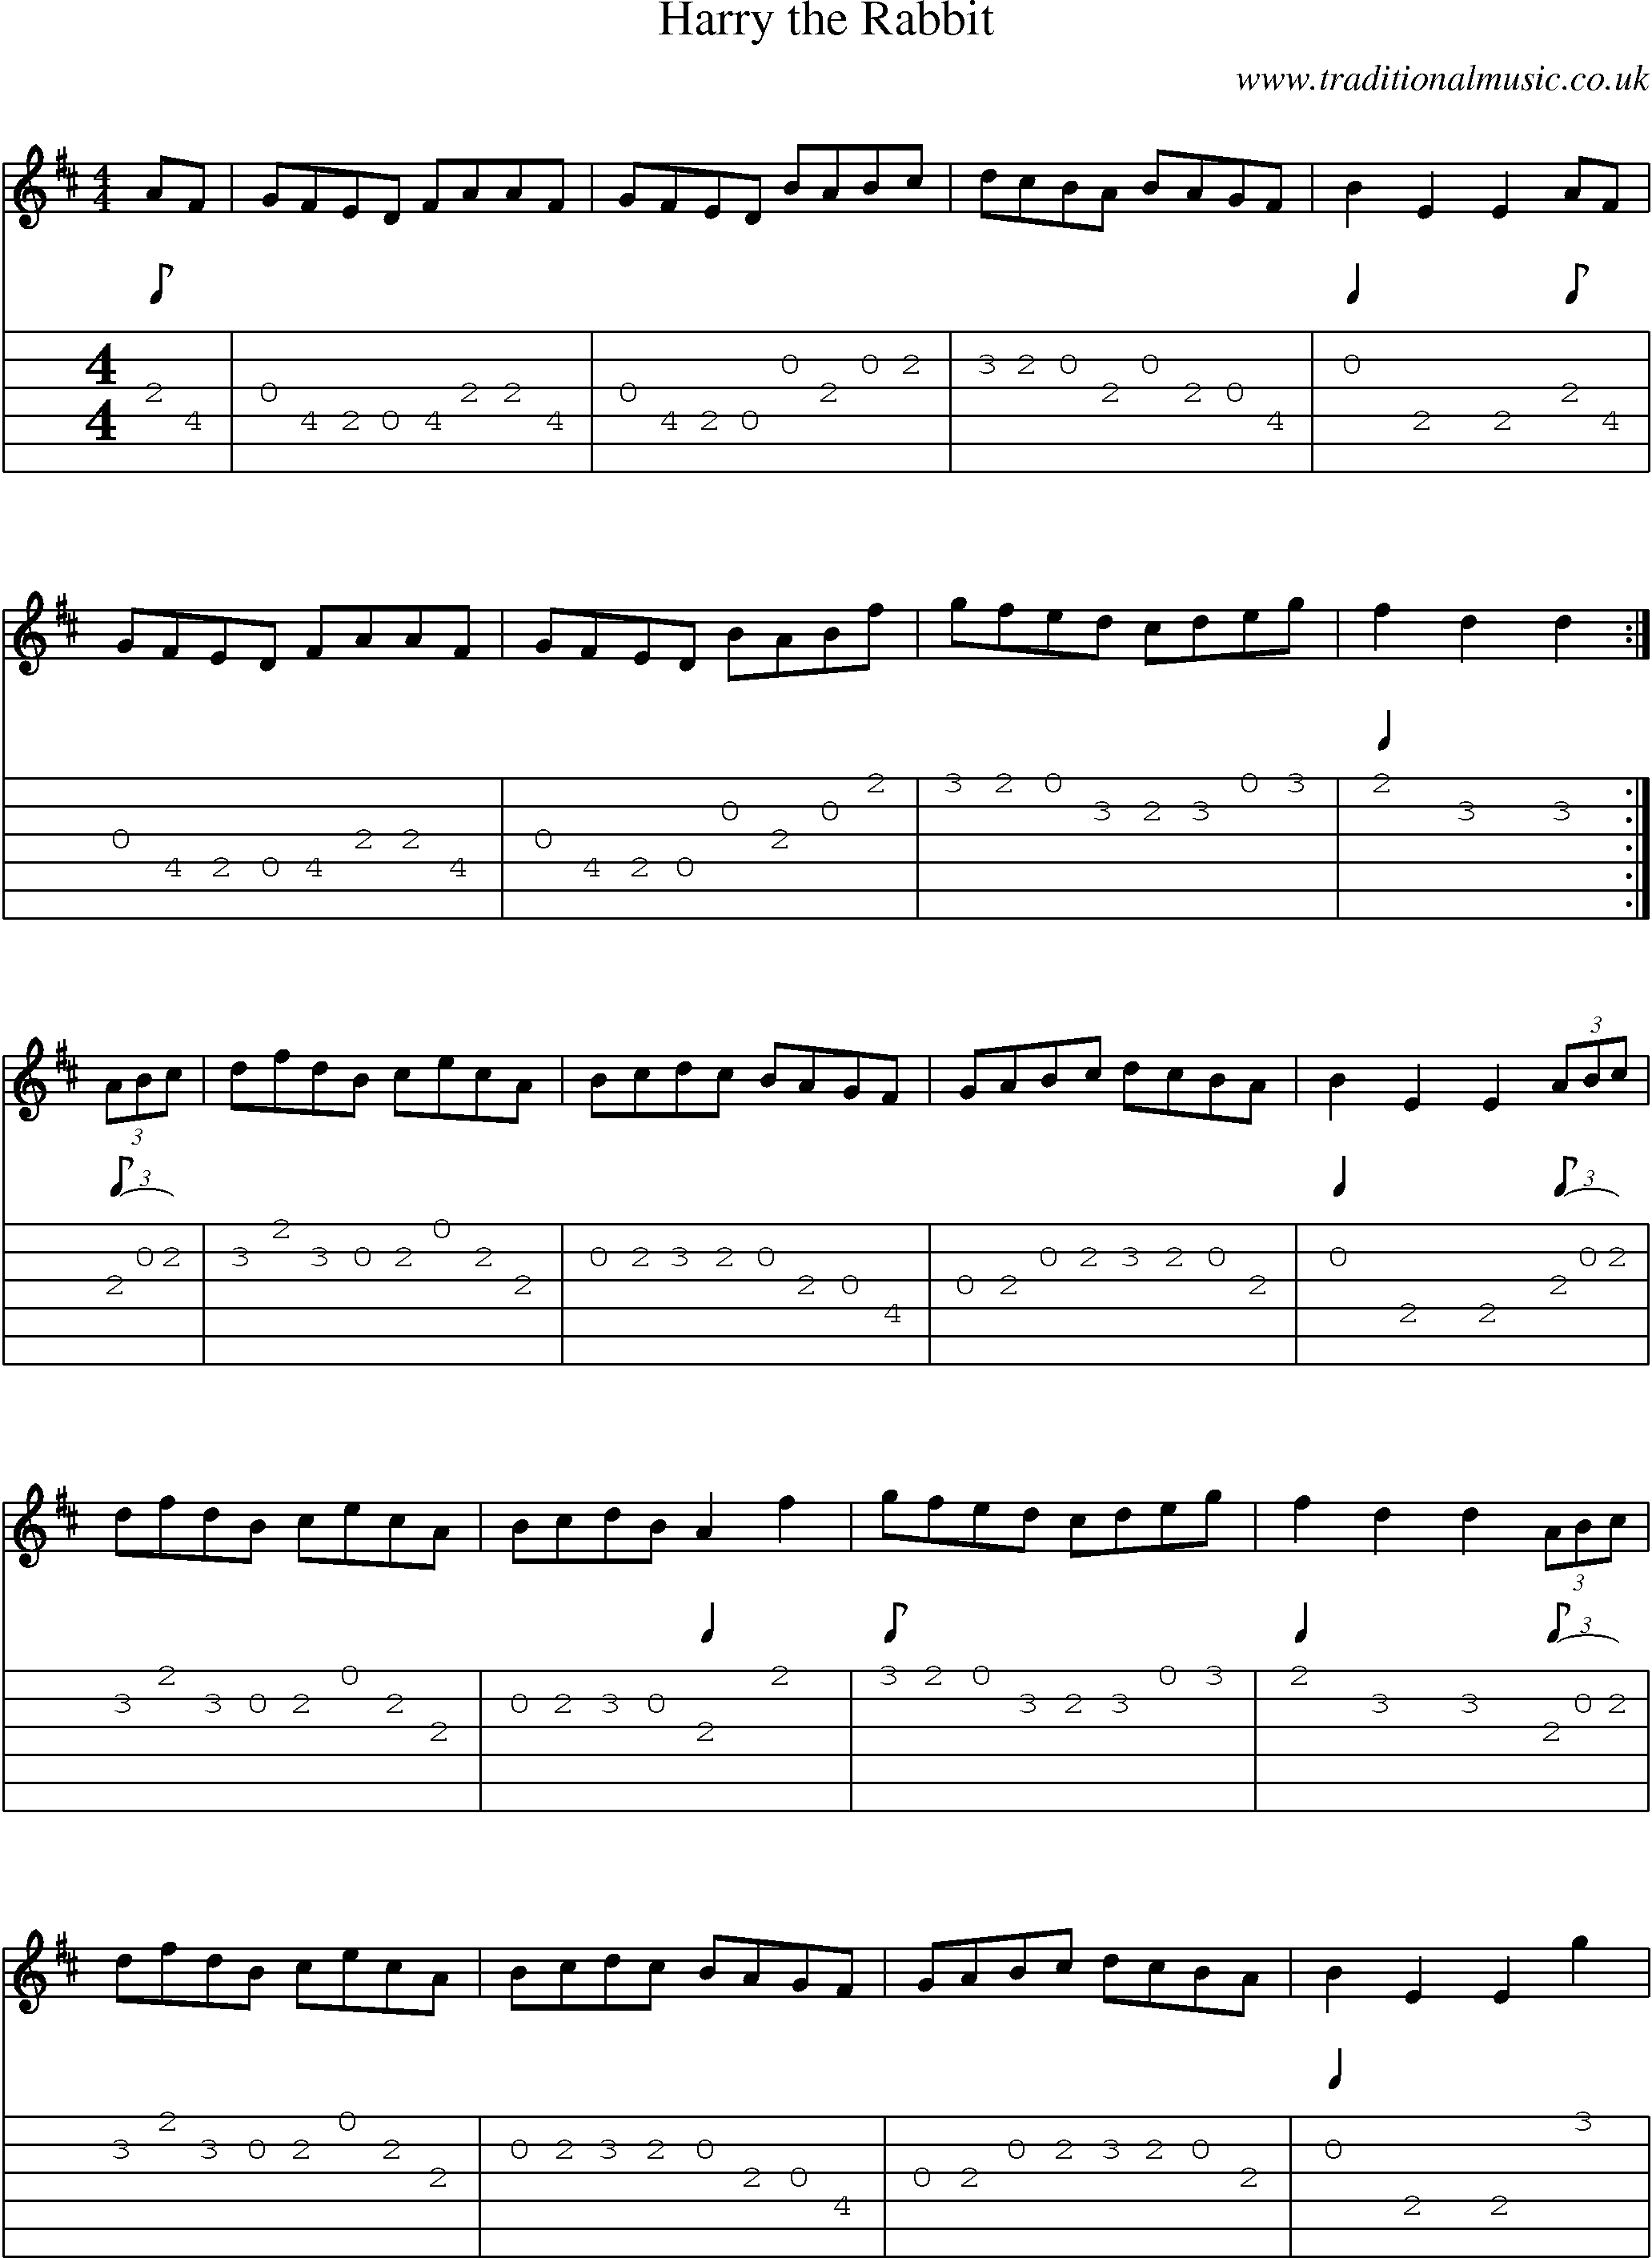 Music Score and Guitar Tabs for Harry Rabbit